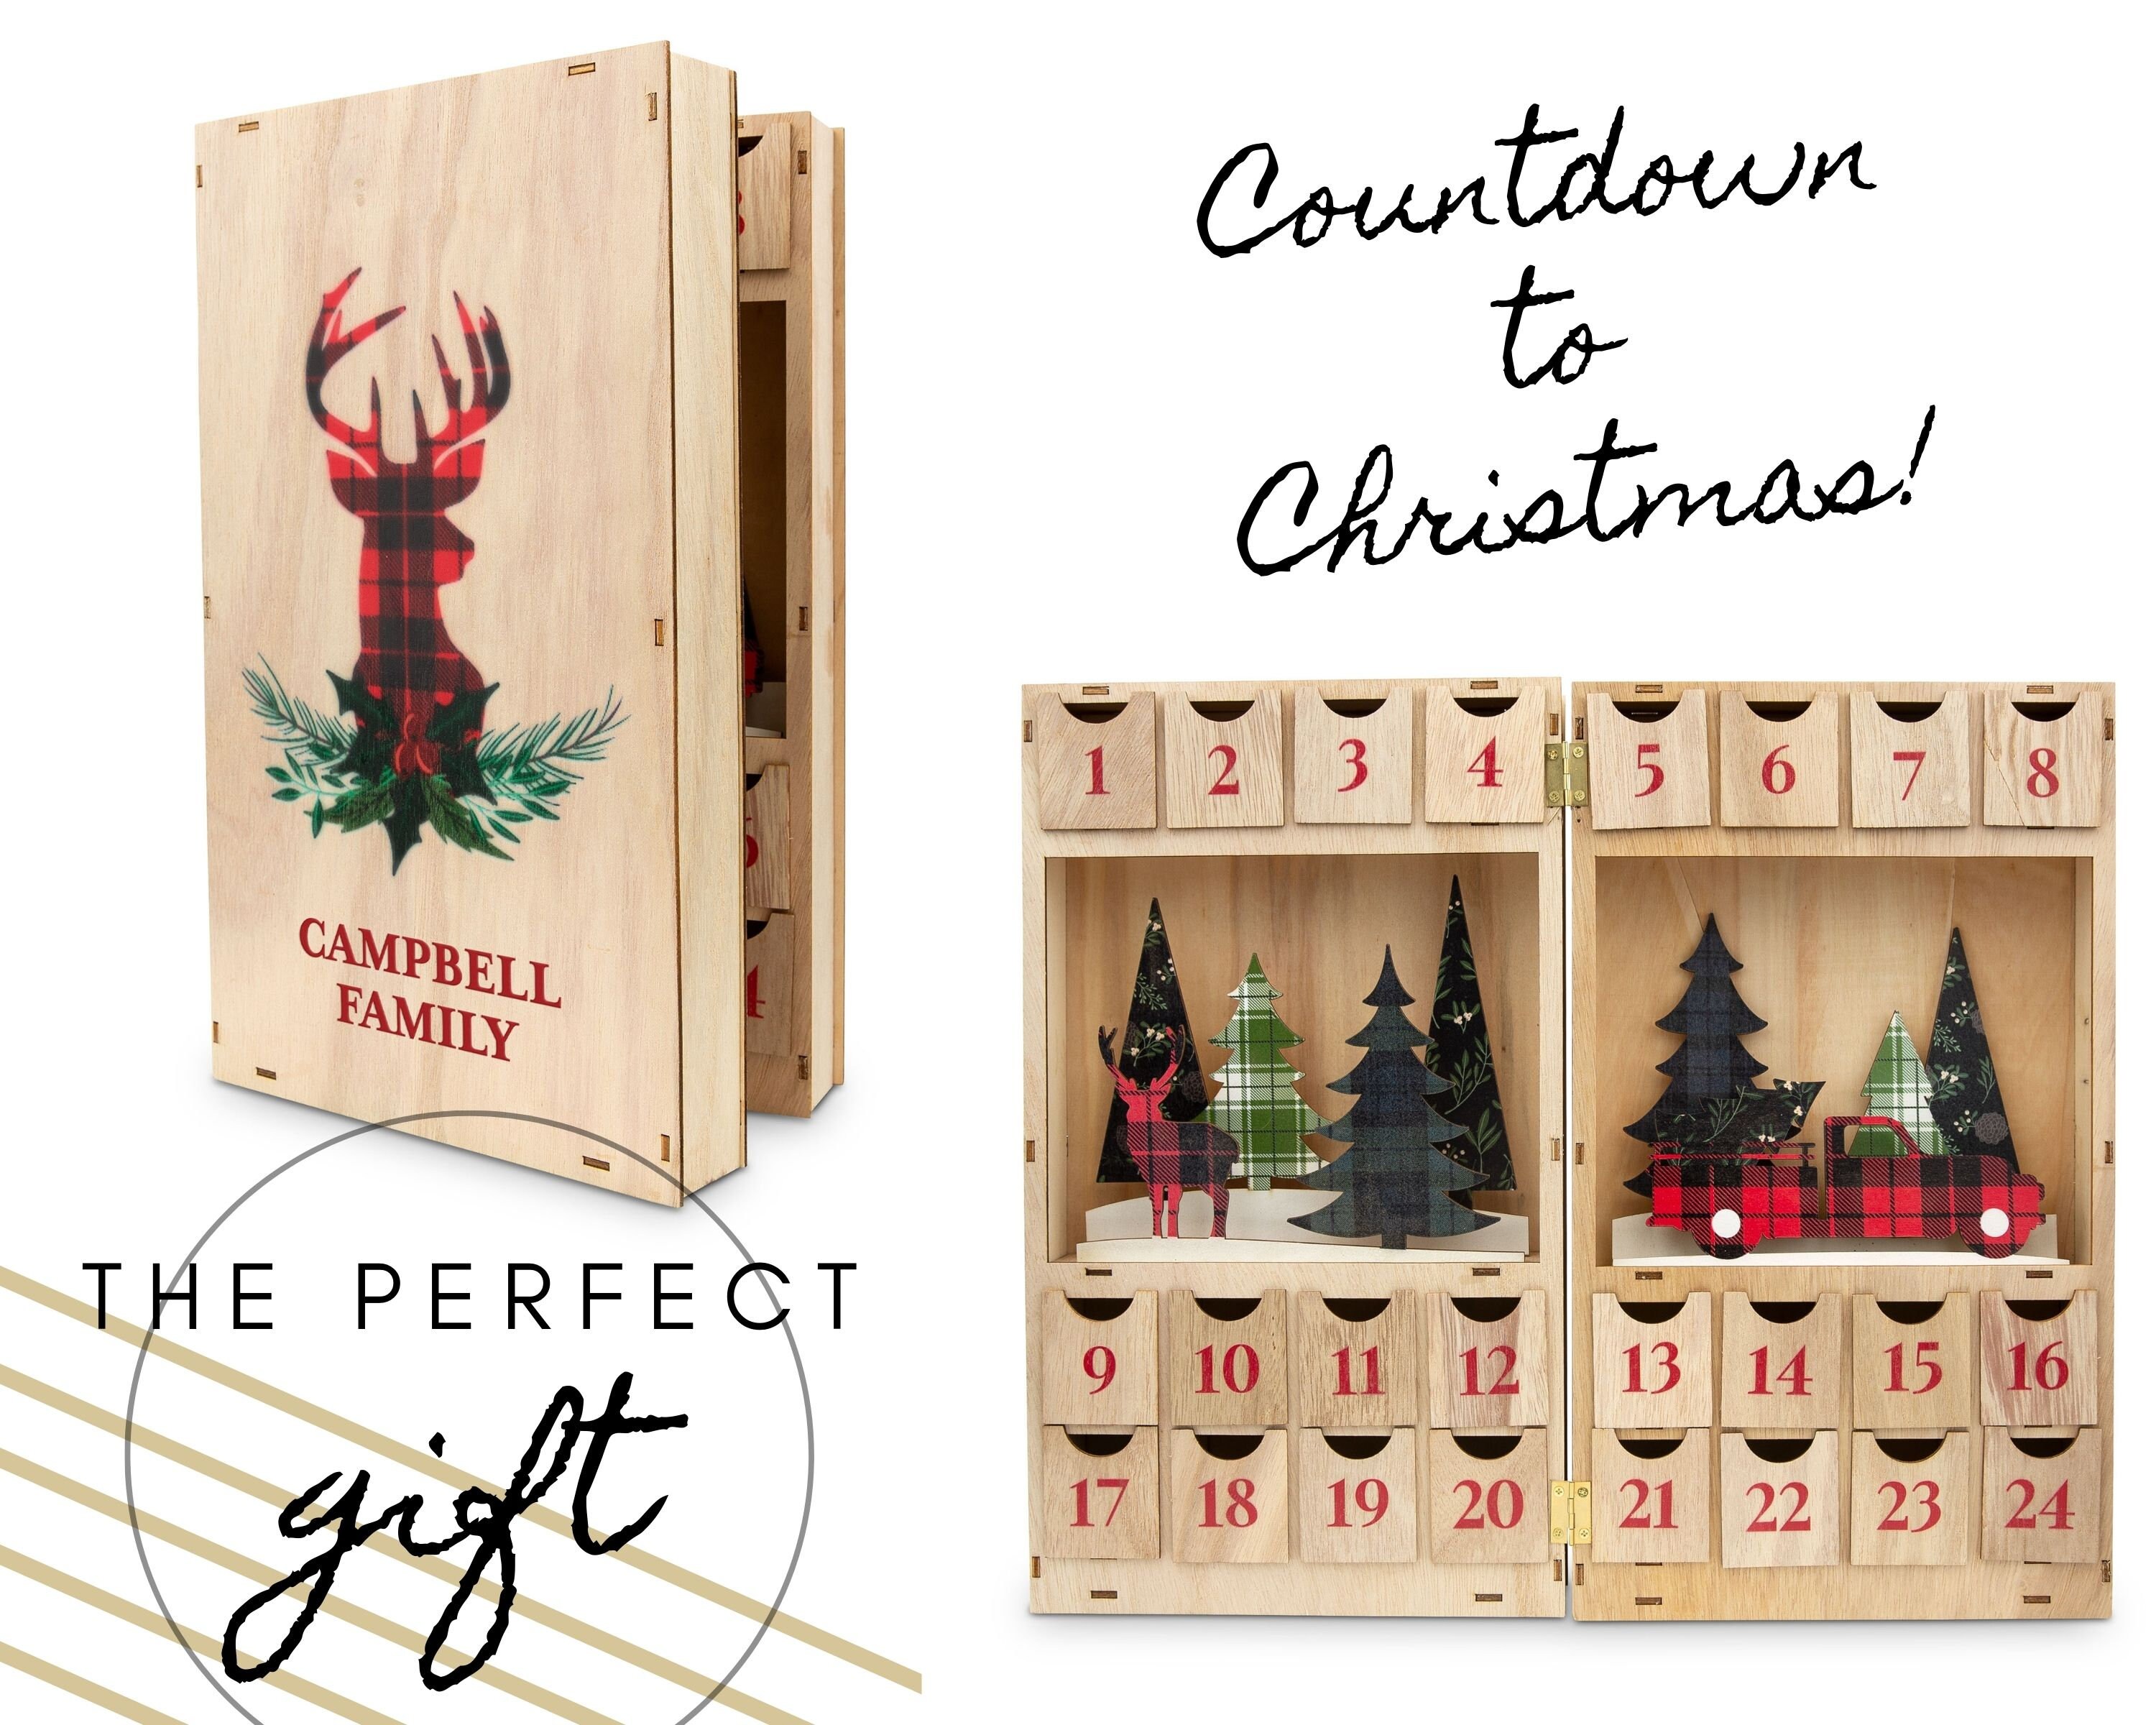 61 Gorgeous 2022 Advent Calendars to Count Down the Festive Season